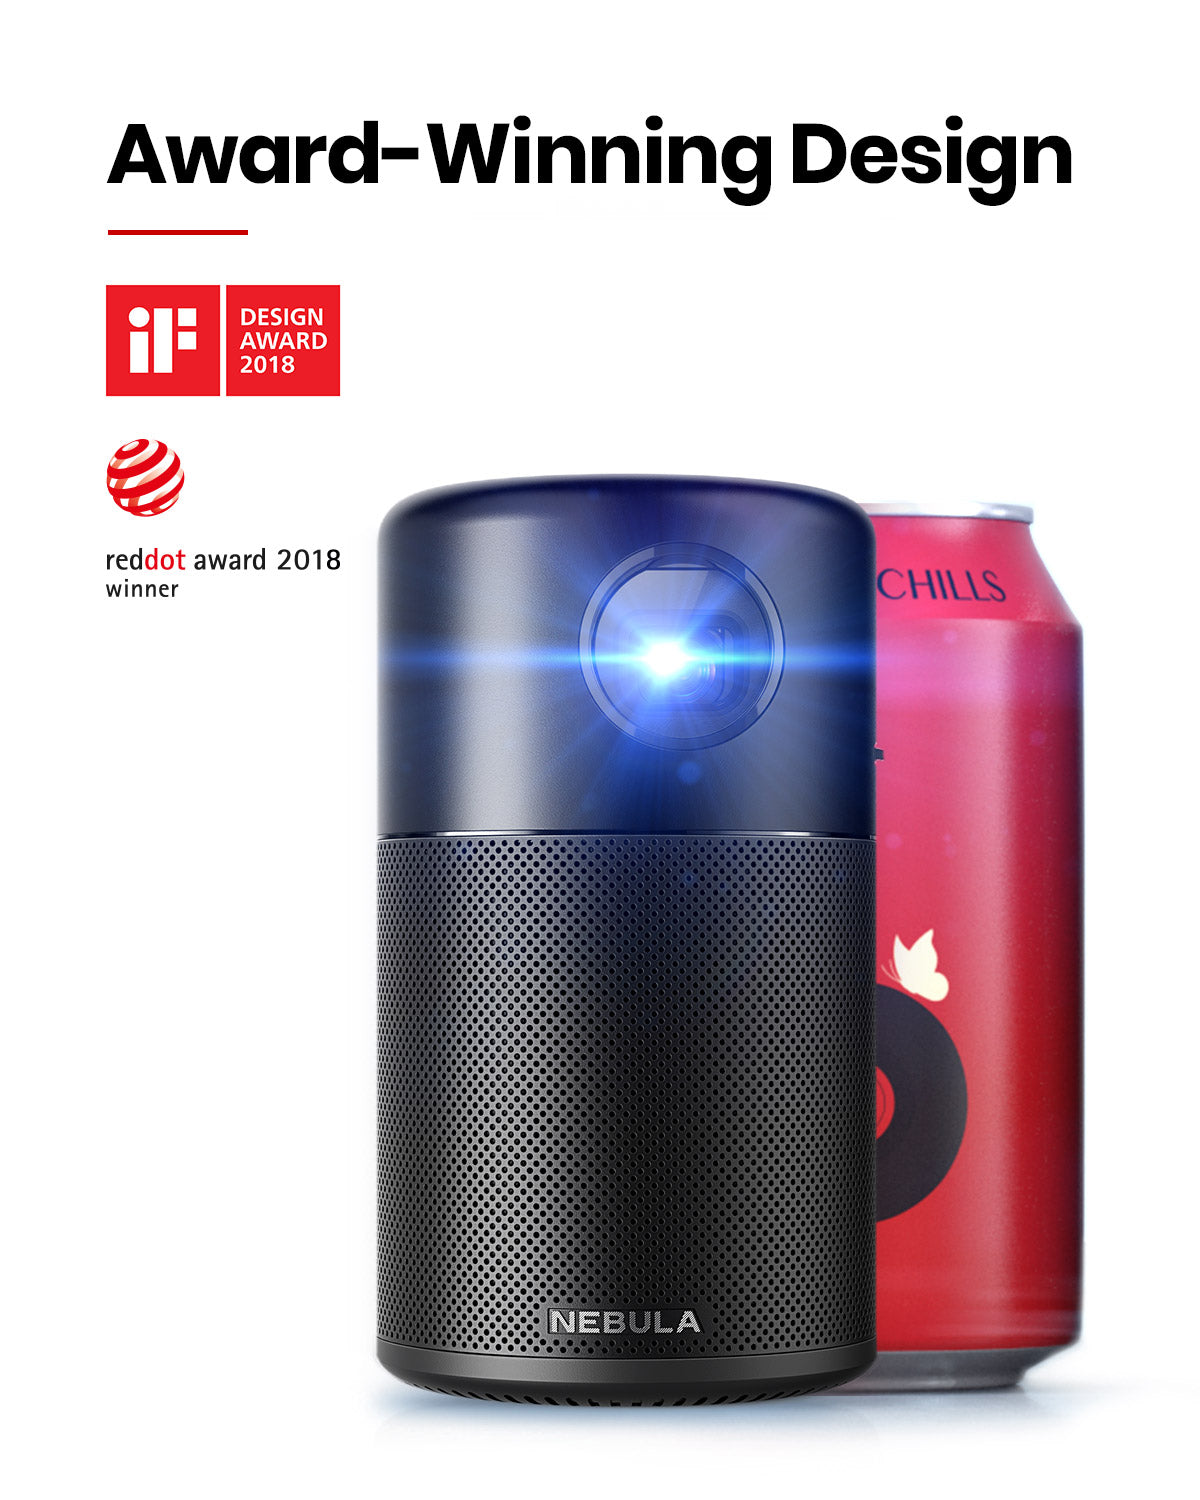 A Capsule portable projector sits in a white room next to a can of soda, while a graphic above shows a Reddot award logo.